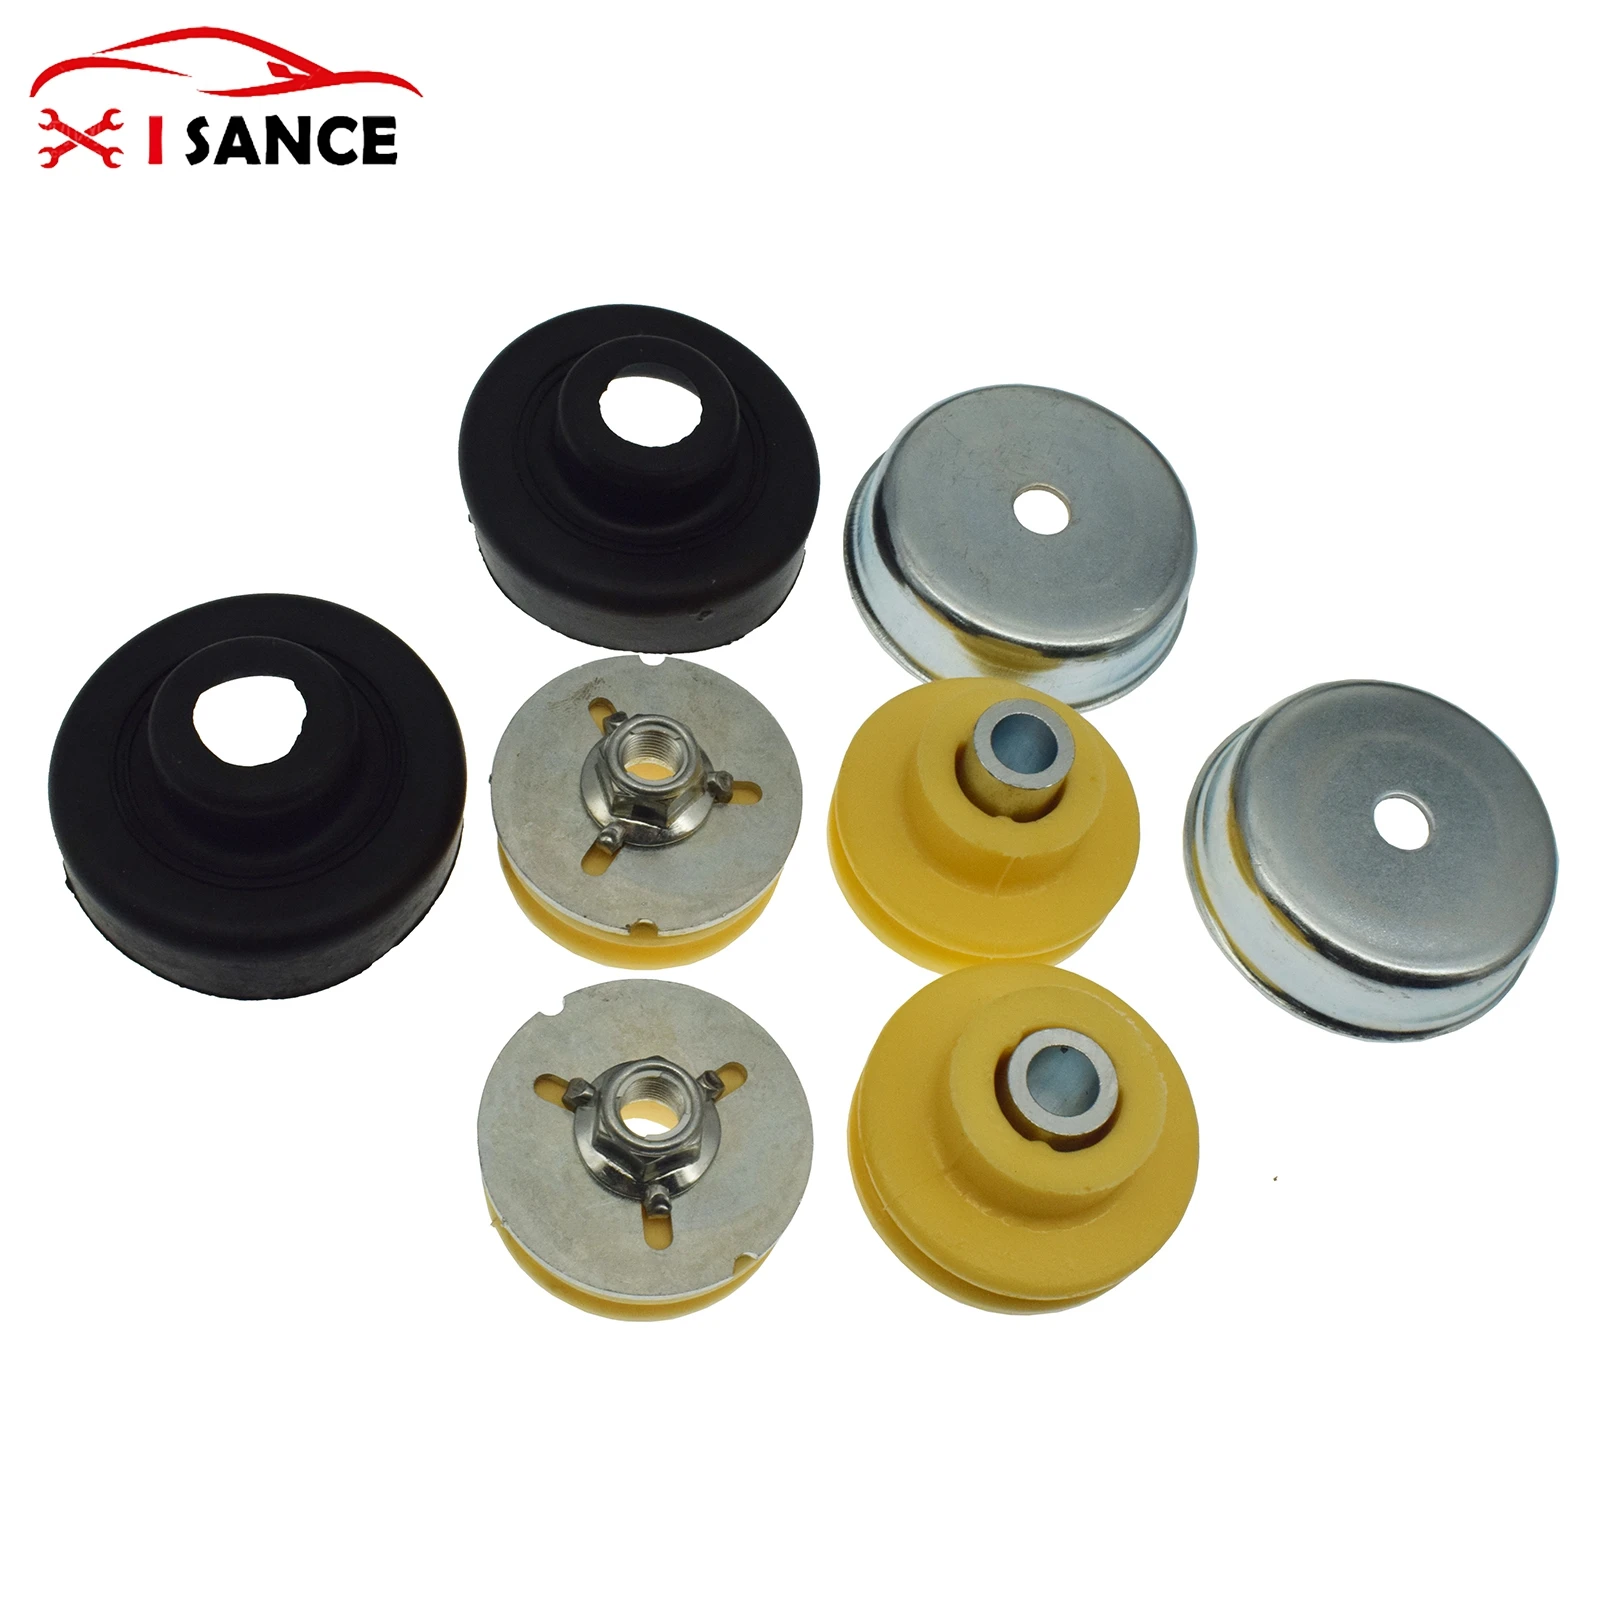 Rear Upper Lower Shock Absorber Mounts Grommets Bump Stops Kit Fits for BMW  E82 E87 E90 E92 Replaces 33506767010 33526768544 33536767334 33506771738